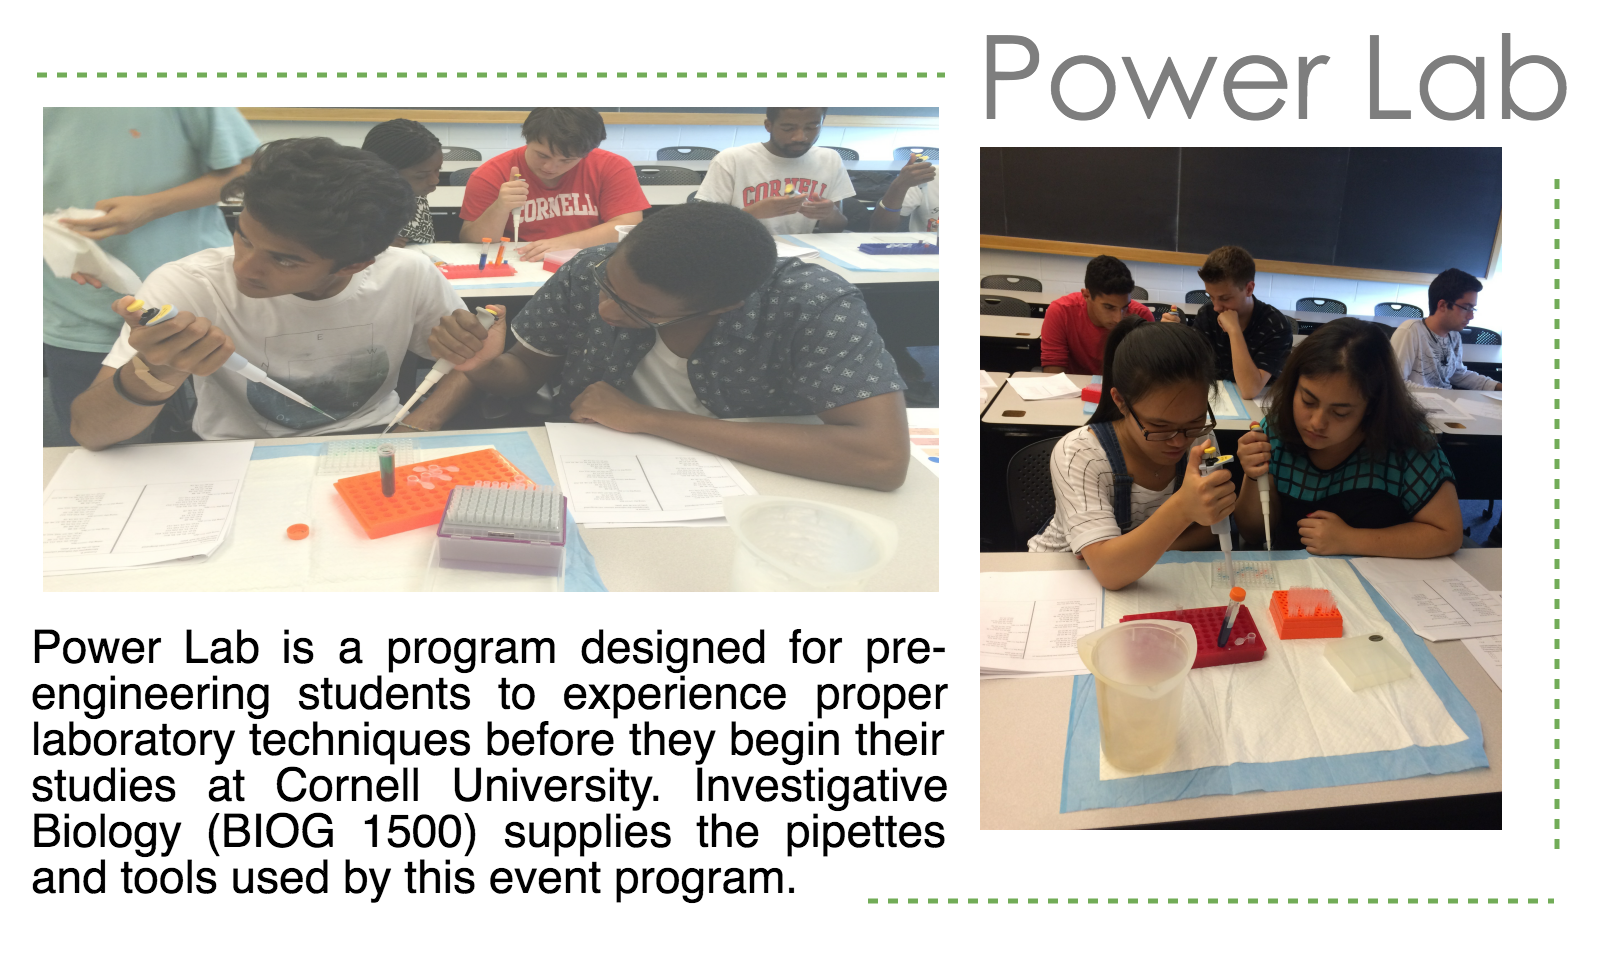 Power Lab for pre-engineering students